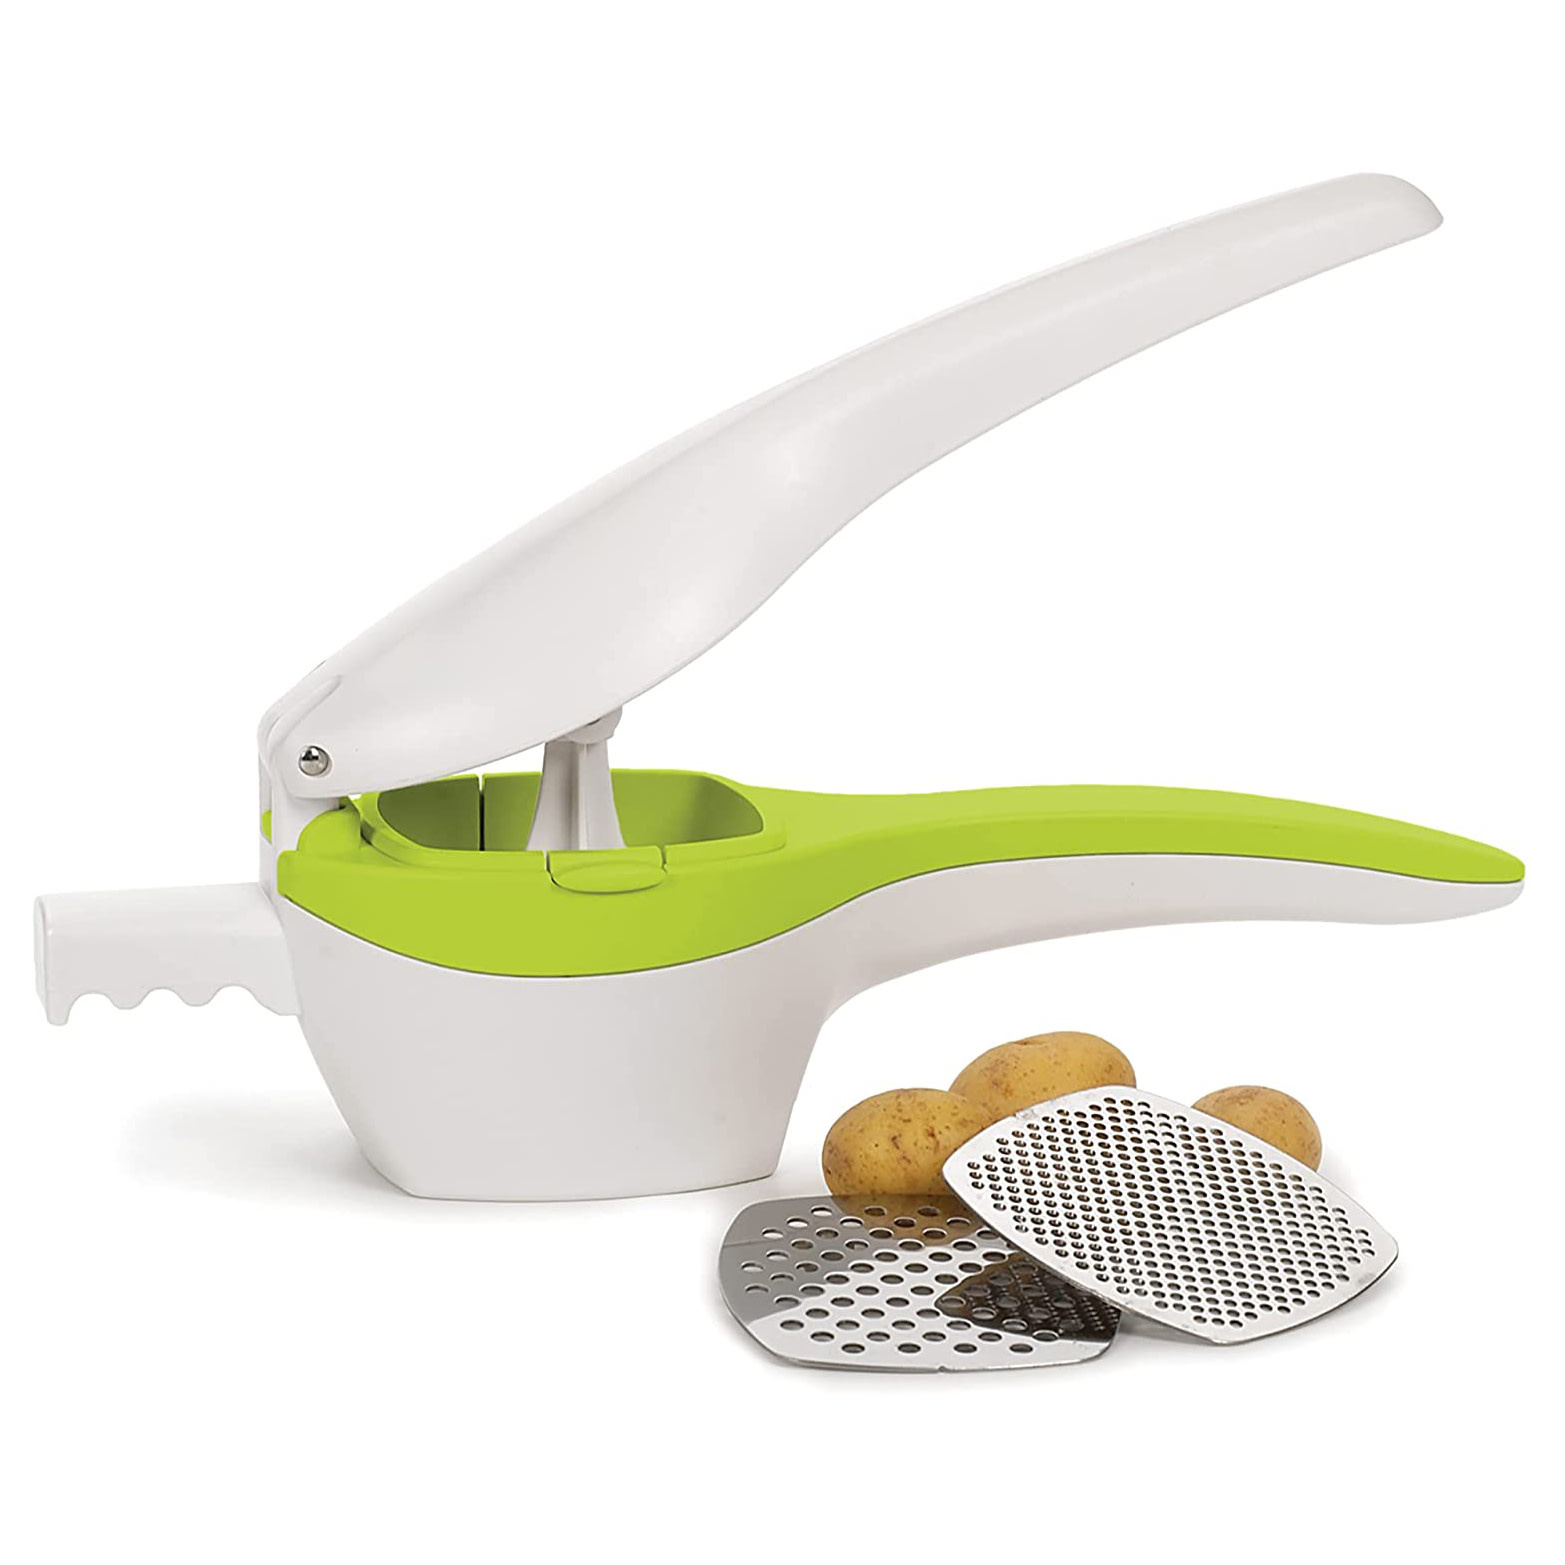 Culina French Fry Cutter Potato Press with SS Blades